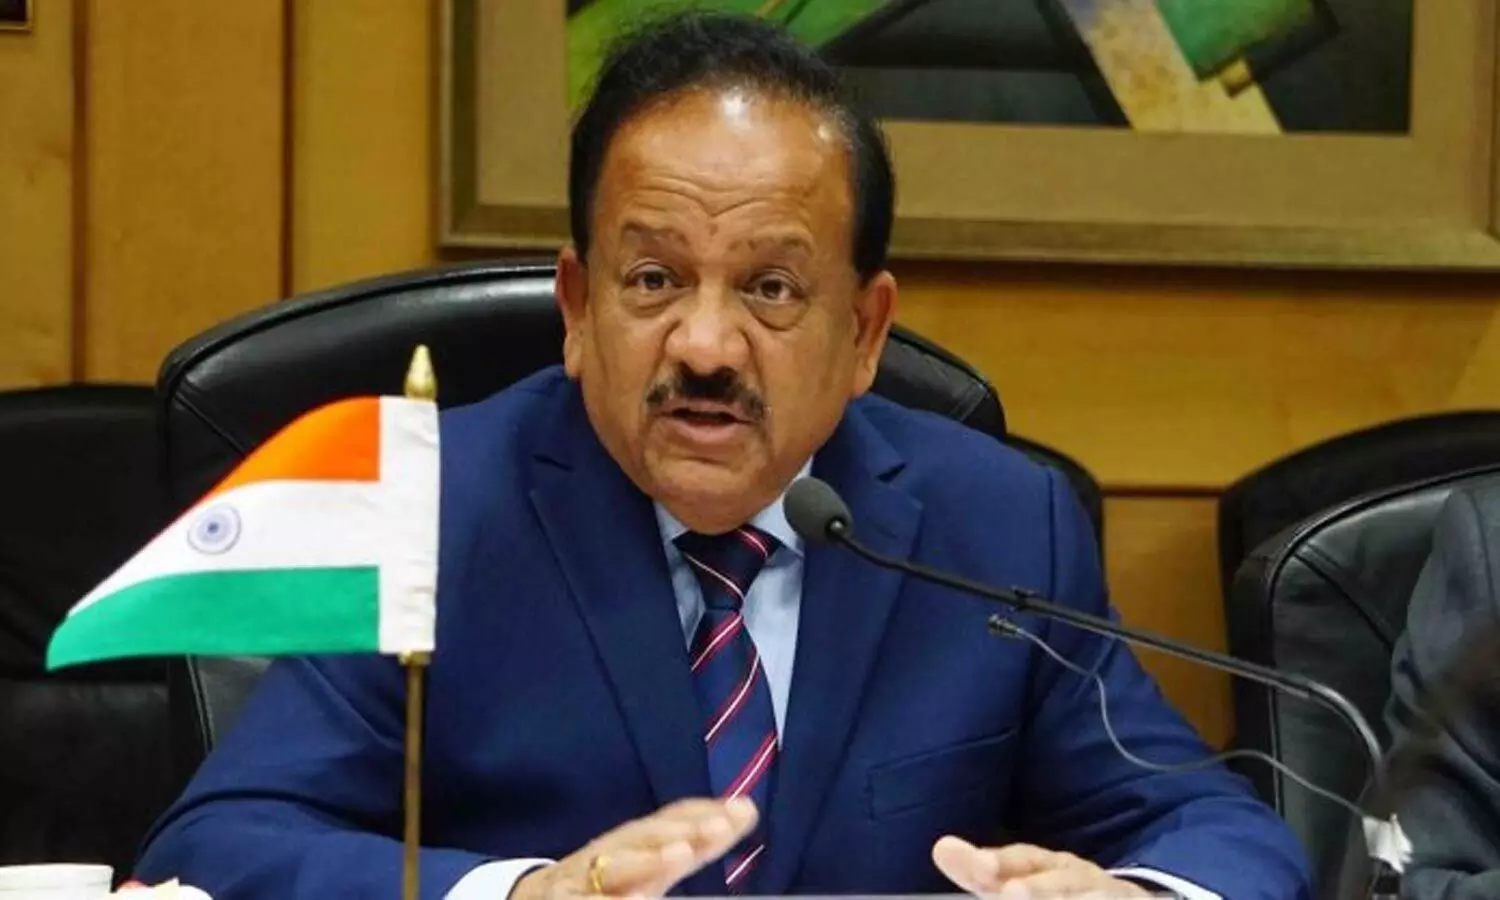 16 AIIMS in different stages of implementation since last 7 years: Dr Harsh Vardhan